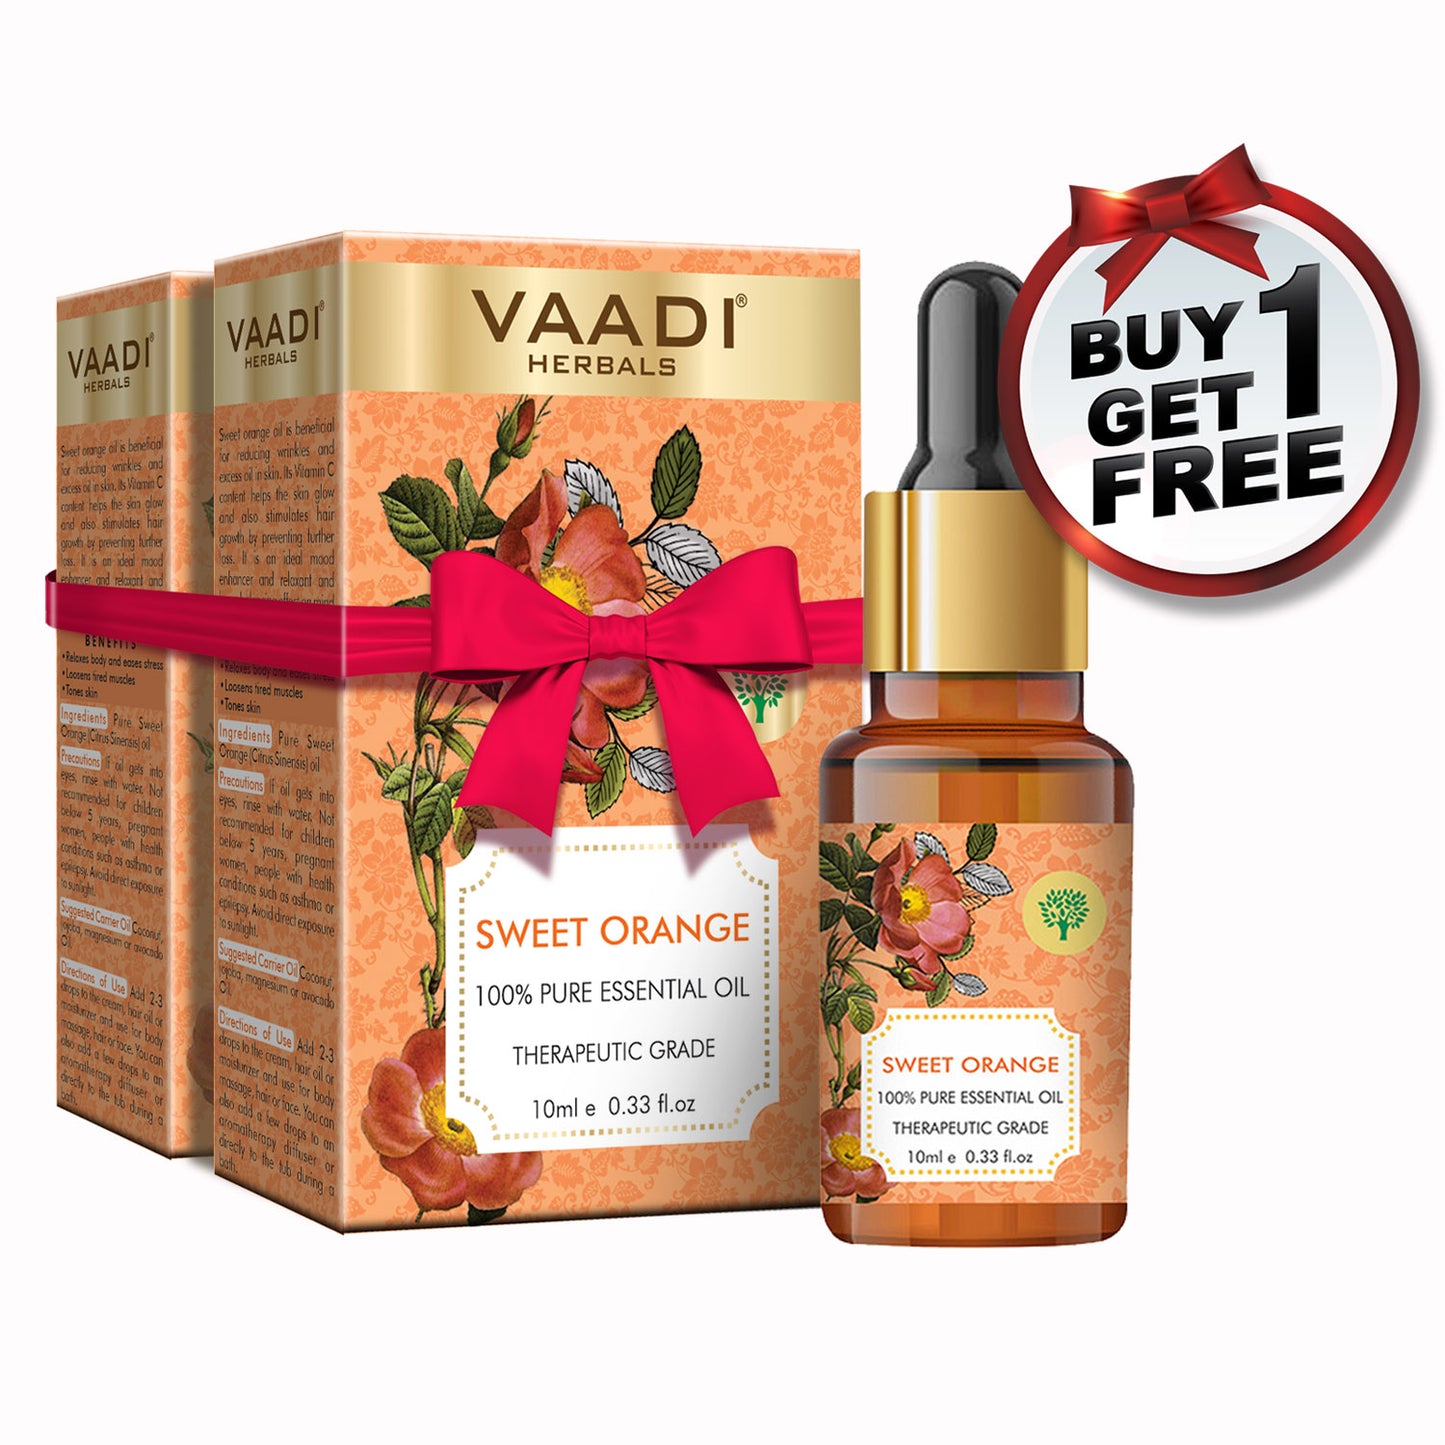 Organic Sweet Orange Essential Oil - Vitamin C Reduces Hairfall, Improves Skin Complexion, Enhances Mood, Loosens Tired Muscles - 100% Pure Therapeutic Grade (10 ml/ 0.33 oz) (Buy 1 Get 1 Free)